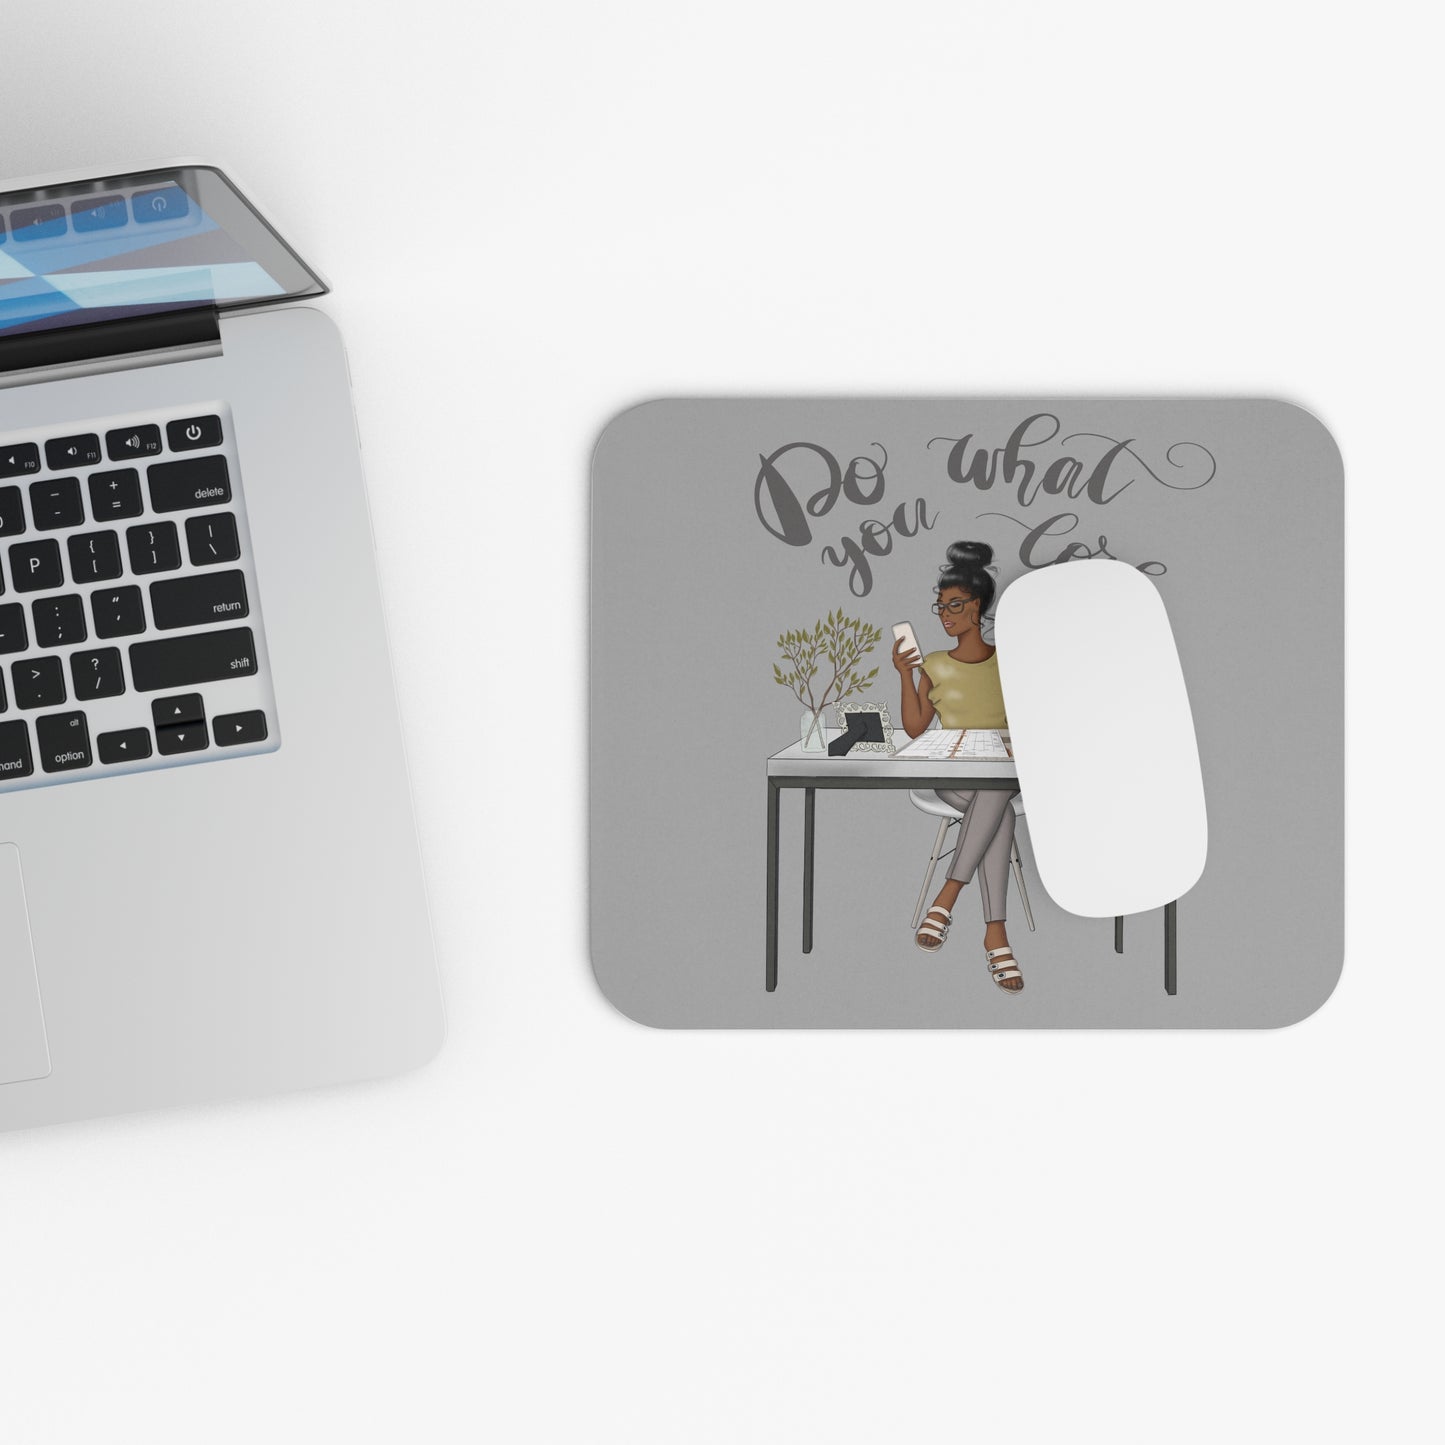 Do What You Love Mouse Pad - Straight Hair - Grey